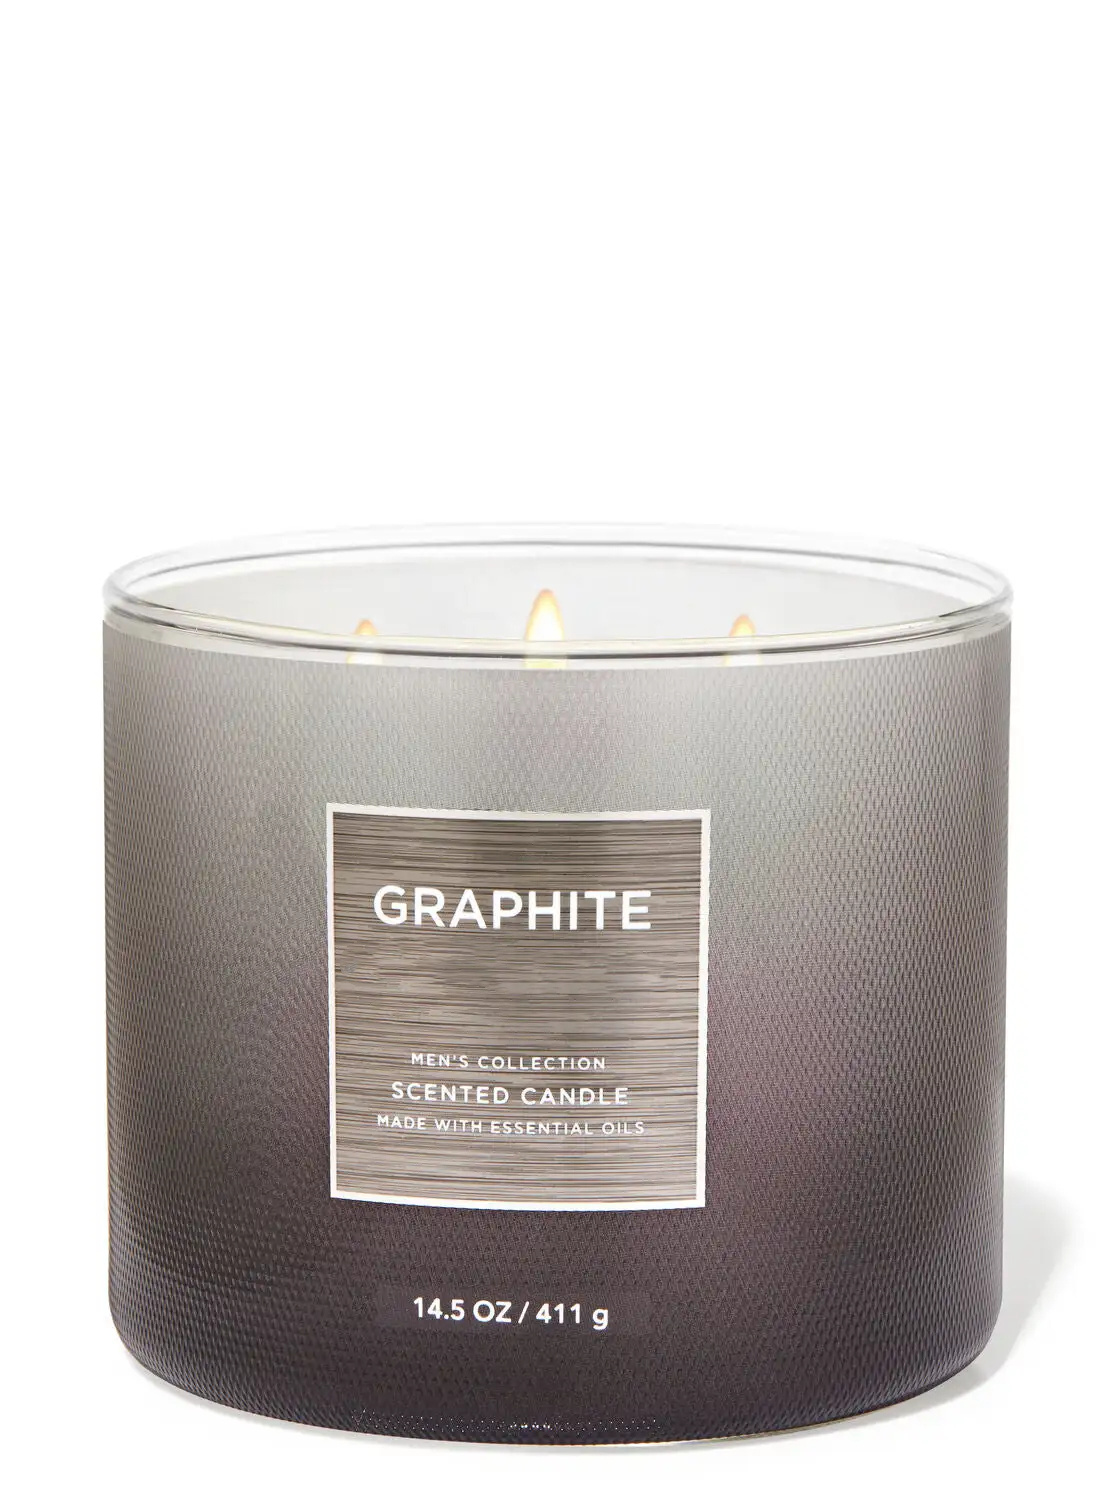 Graphite - candles